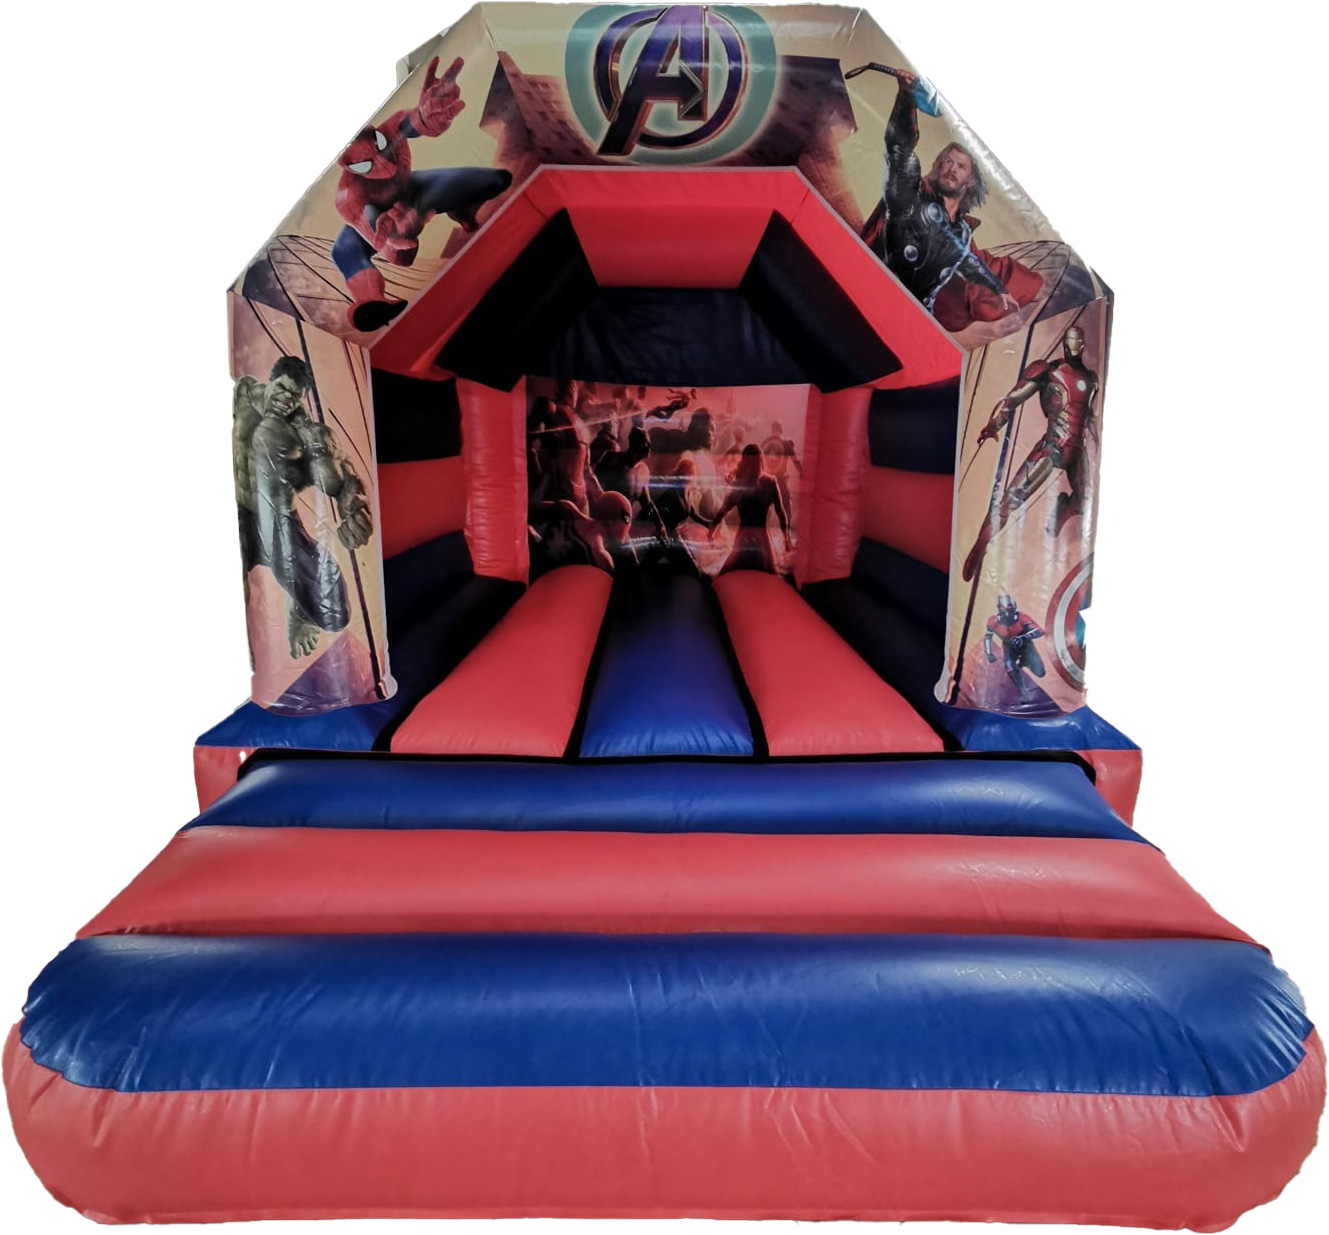 Bouncy Castle Sales - BC683 - Bouncy Inflatable for sale